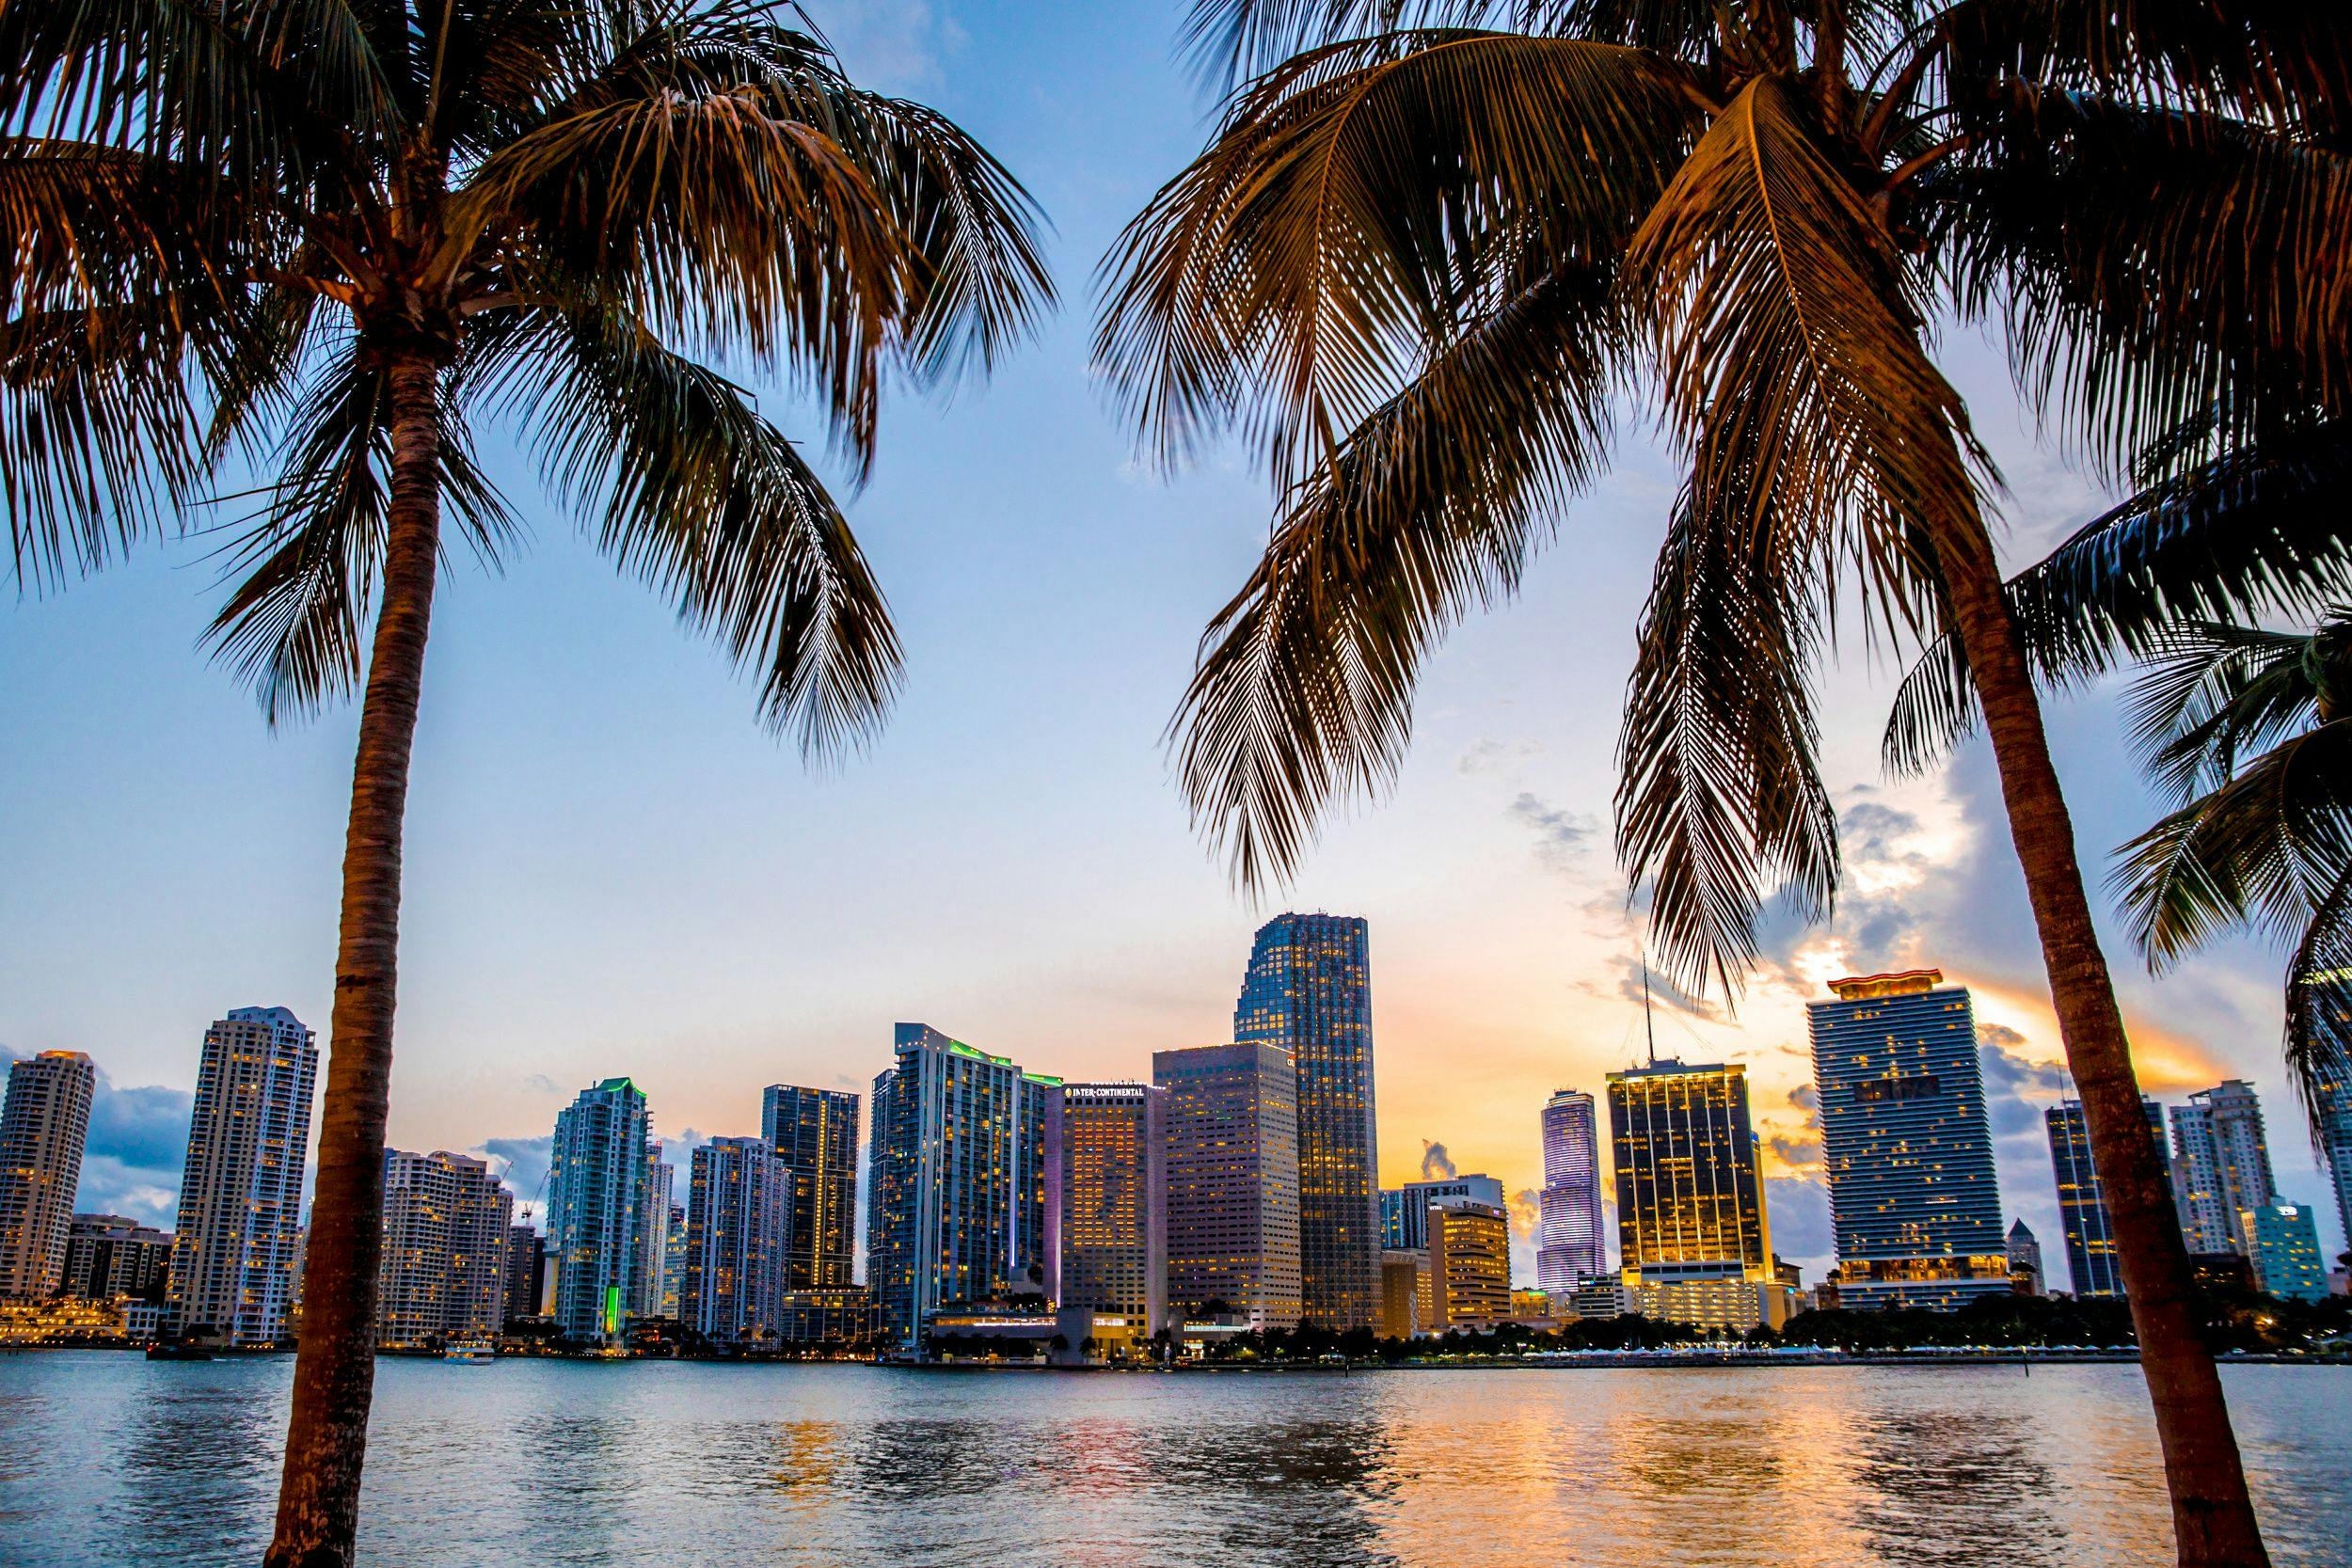 POLL: Are You Attending the Society of Dermatology Physician Assistants Conference in Miami, Florida?